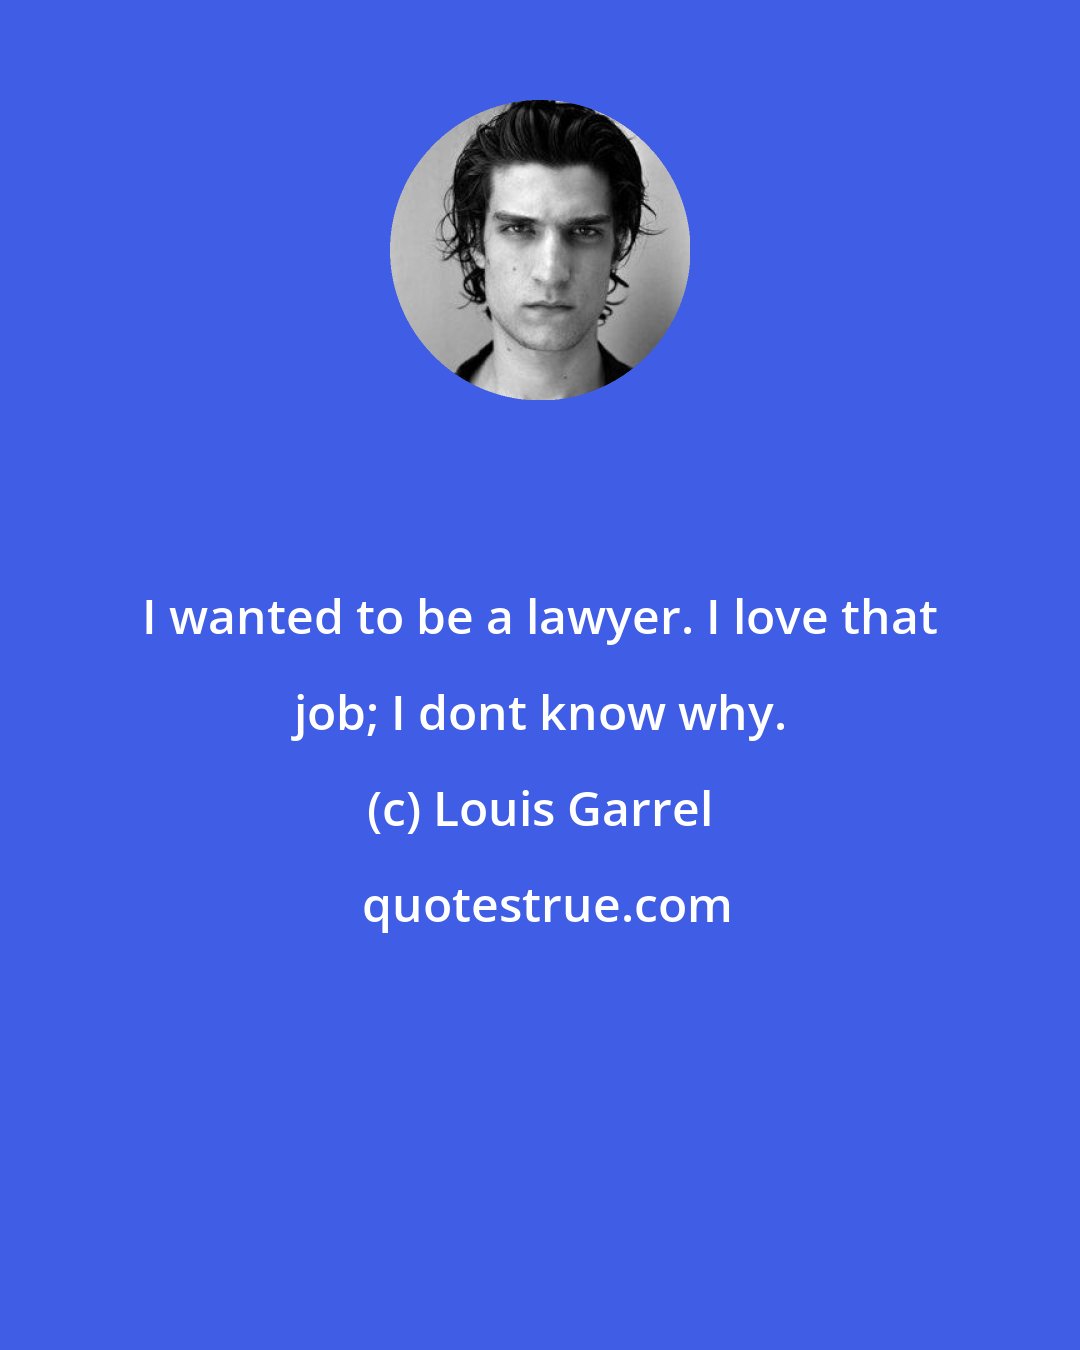 Louis Garrel: I wanted to be a lawyer. I love that job; I dont know why.